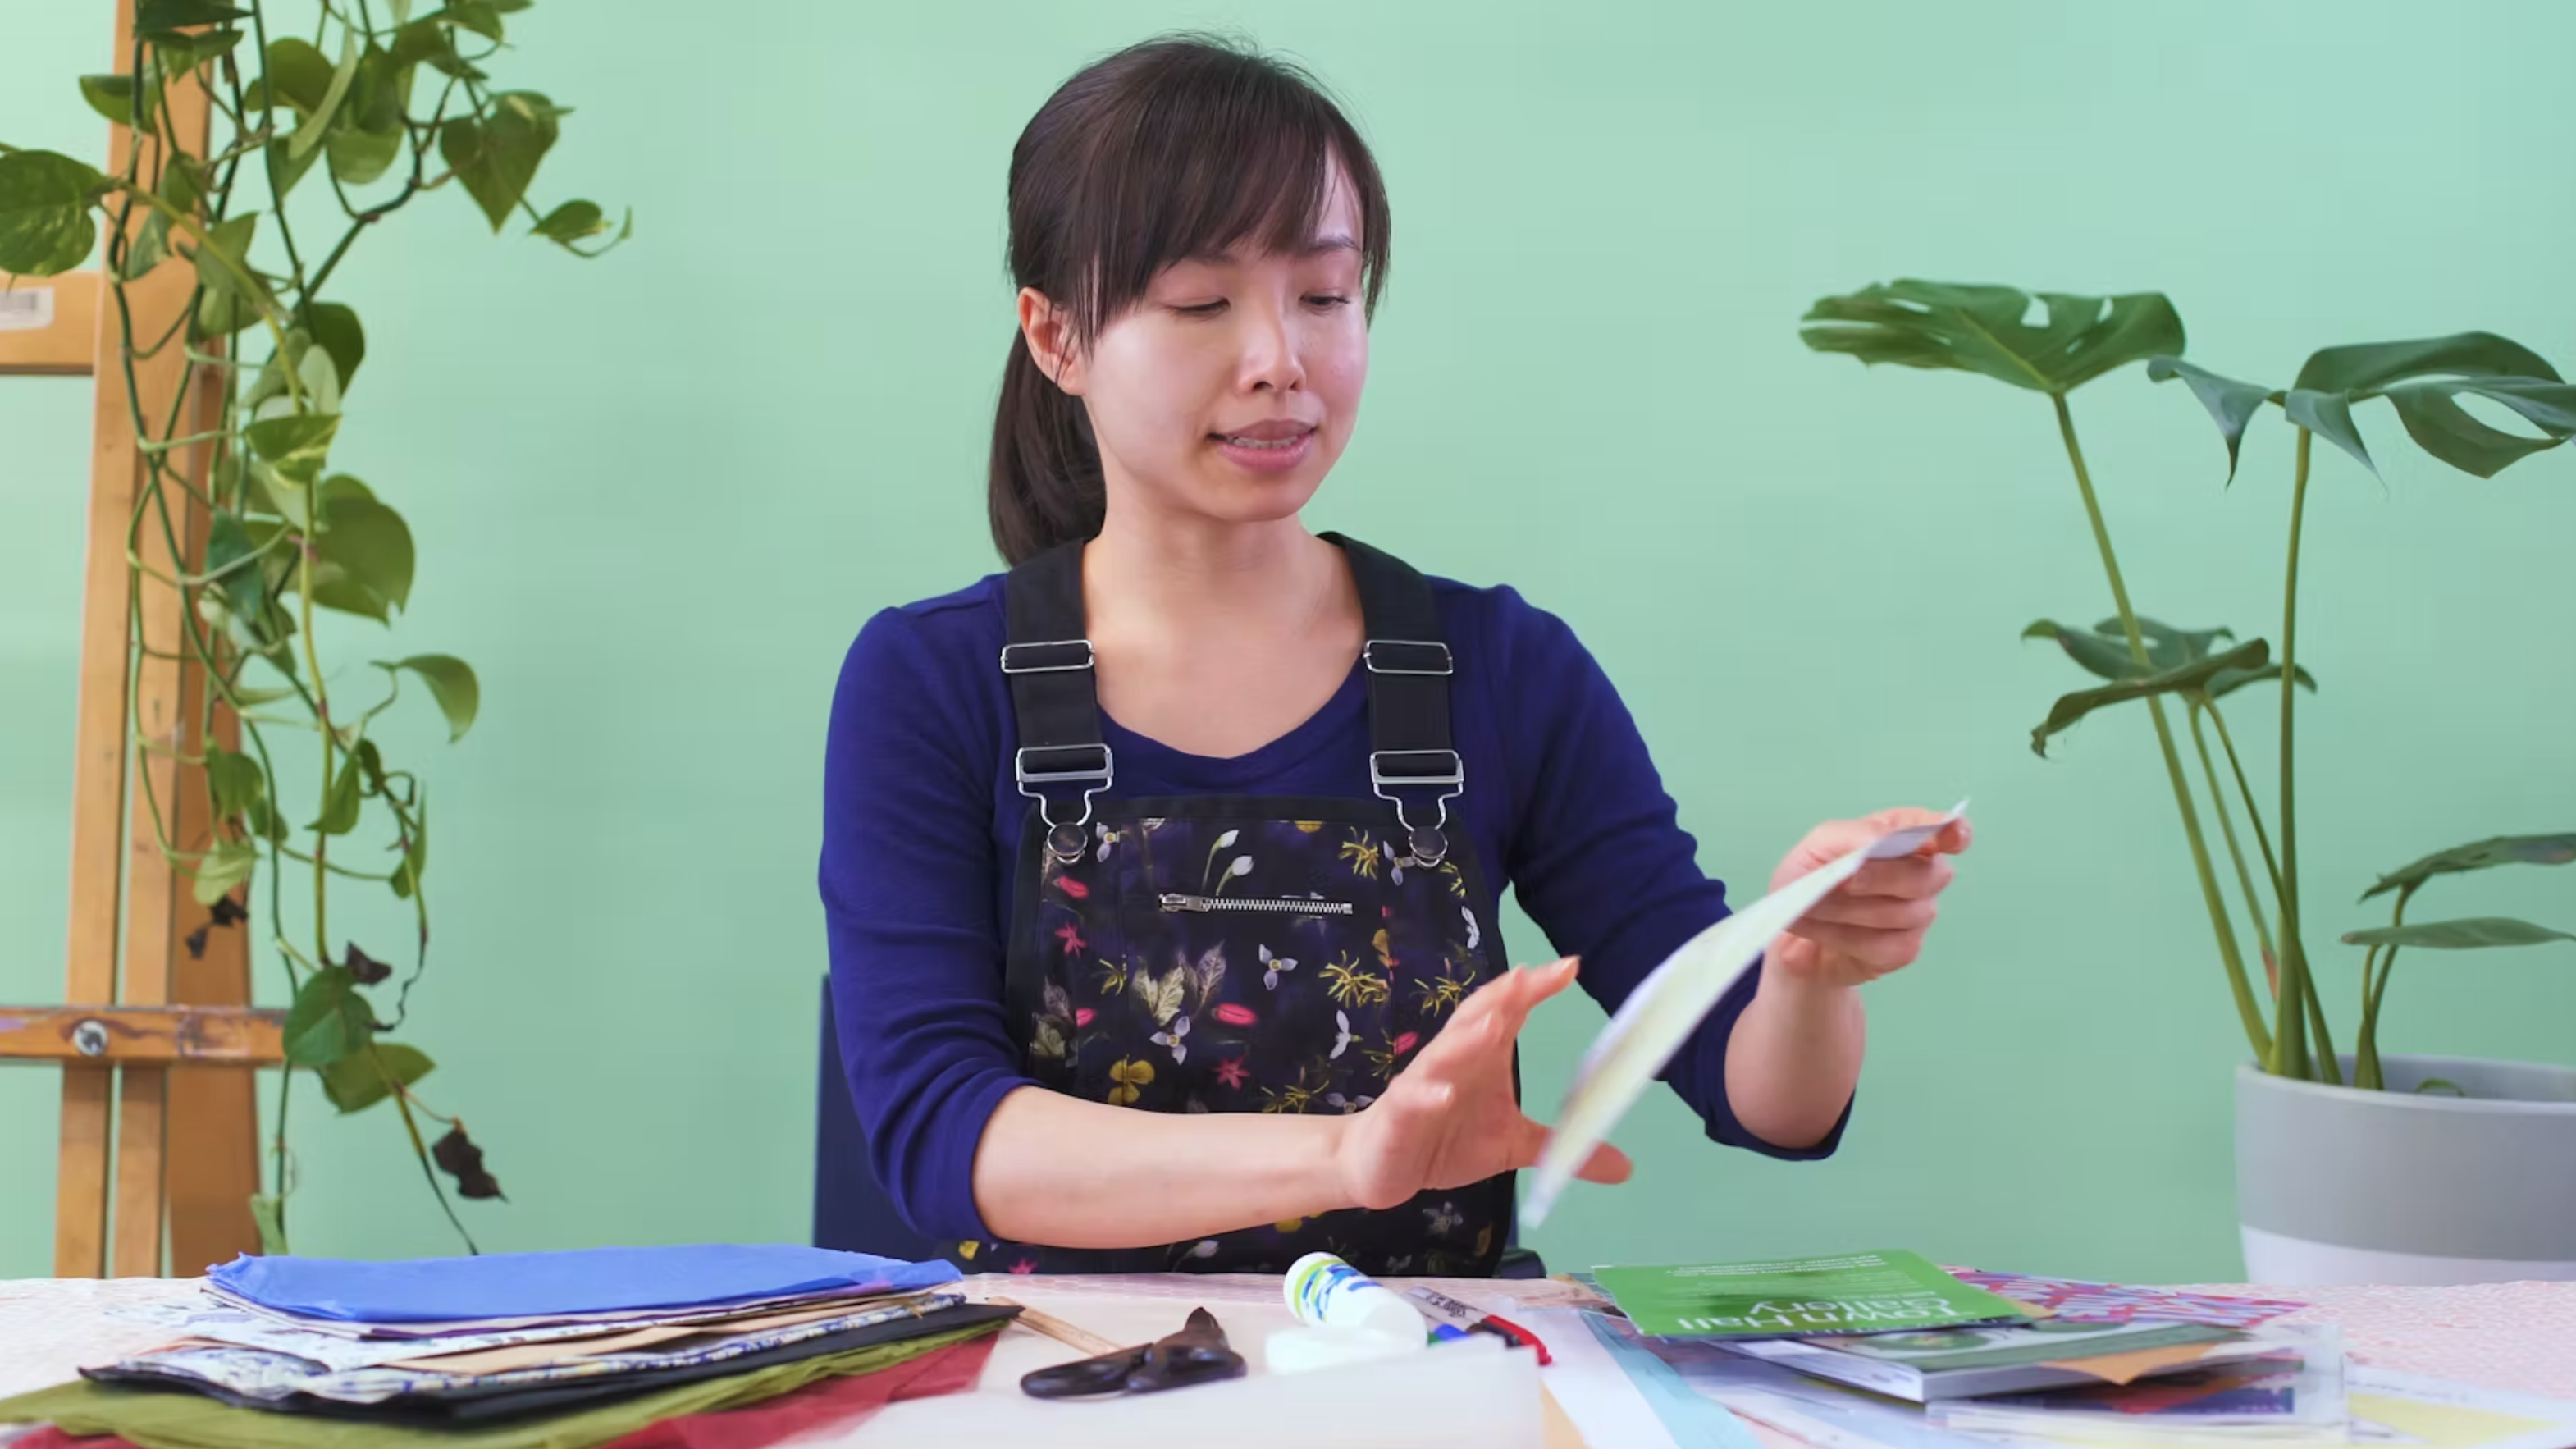 An East Asian female-presenting artist wearing overalls cuts paper in a room with teal walls and vibrant indoor plants.